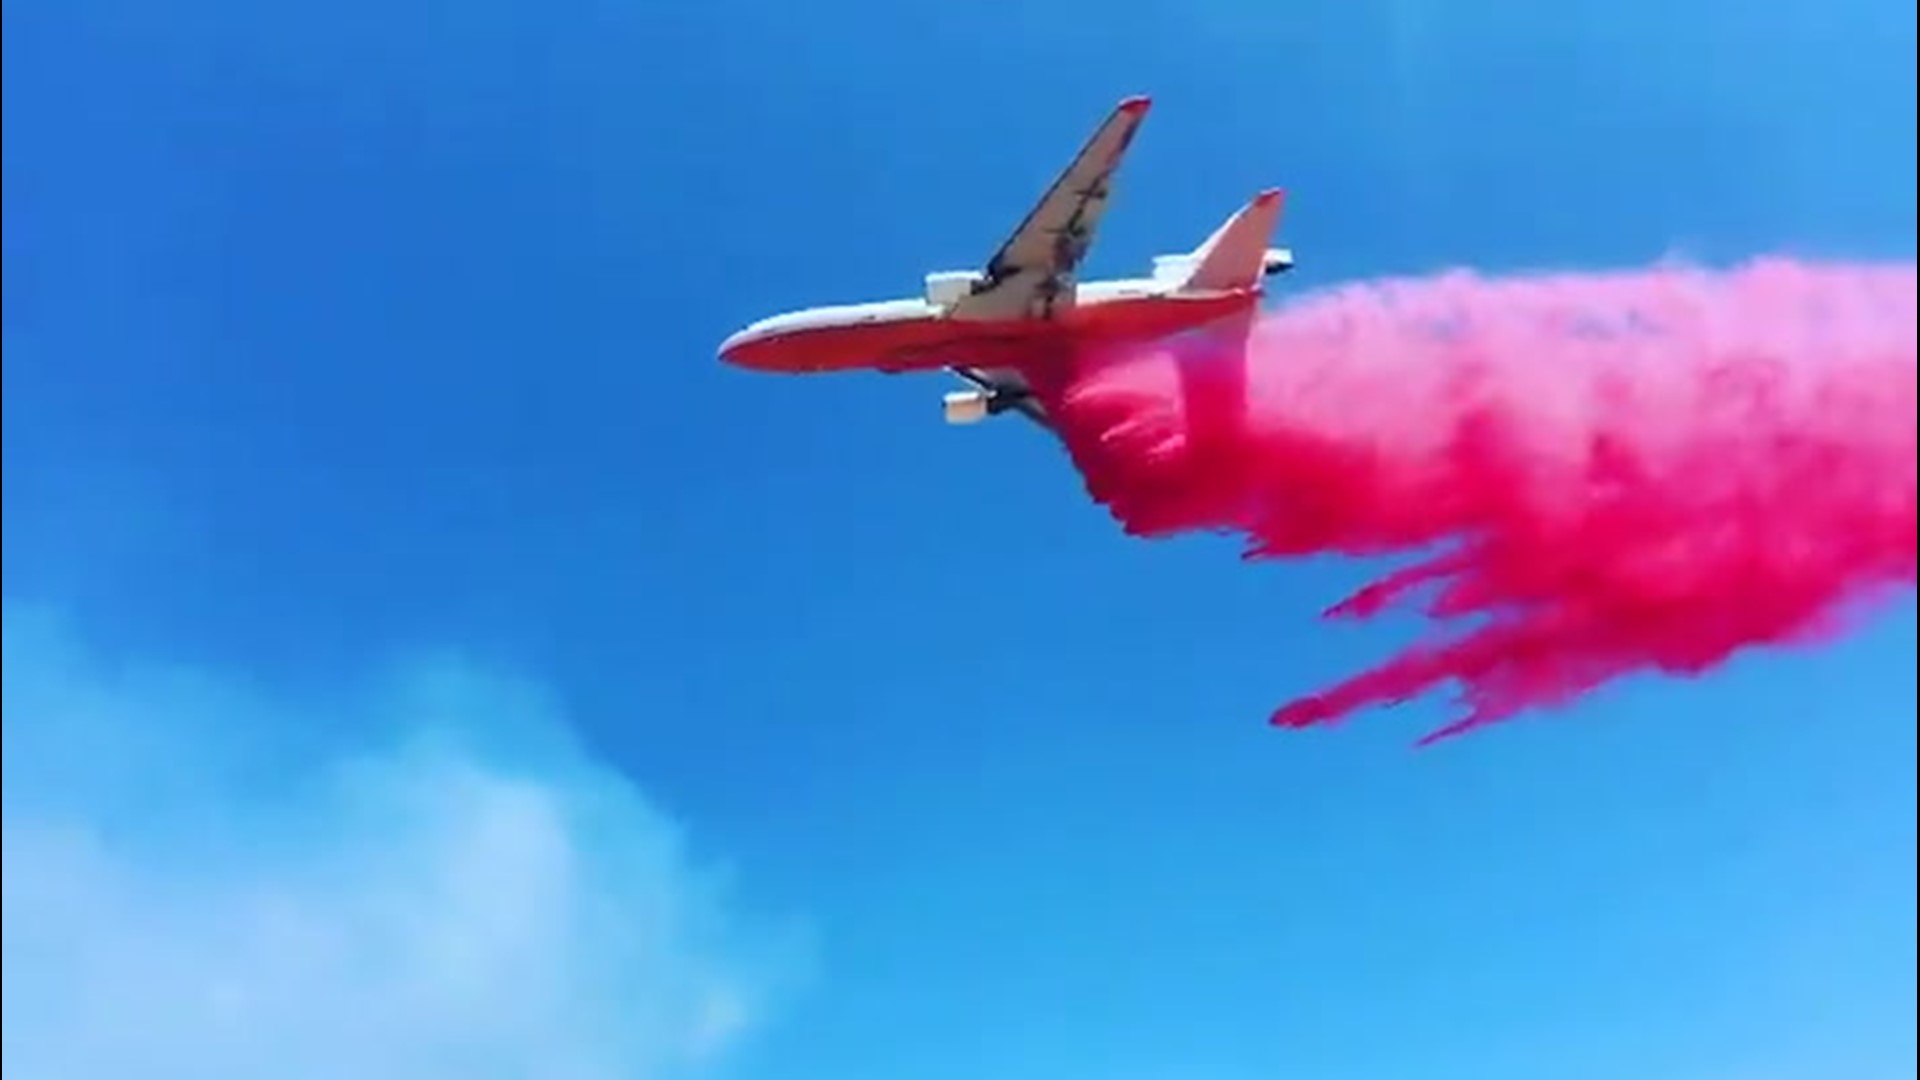 This tanker drops retardant to contain the Cottonwood Fire burning in Pinal County, Arizona, on May 23. At least 120 acres burned and 75 percent is contained.